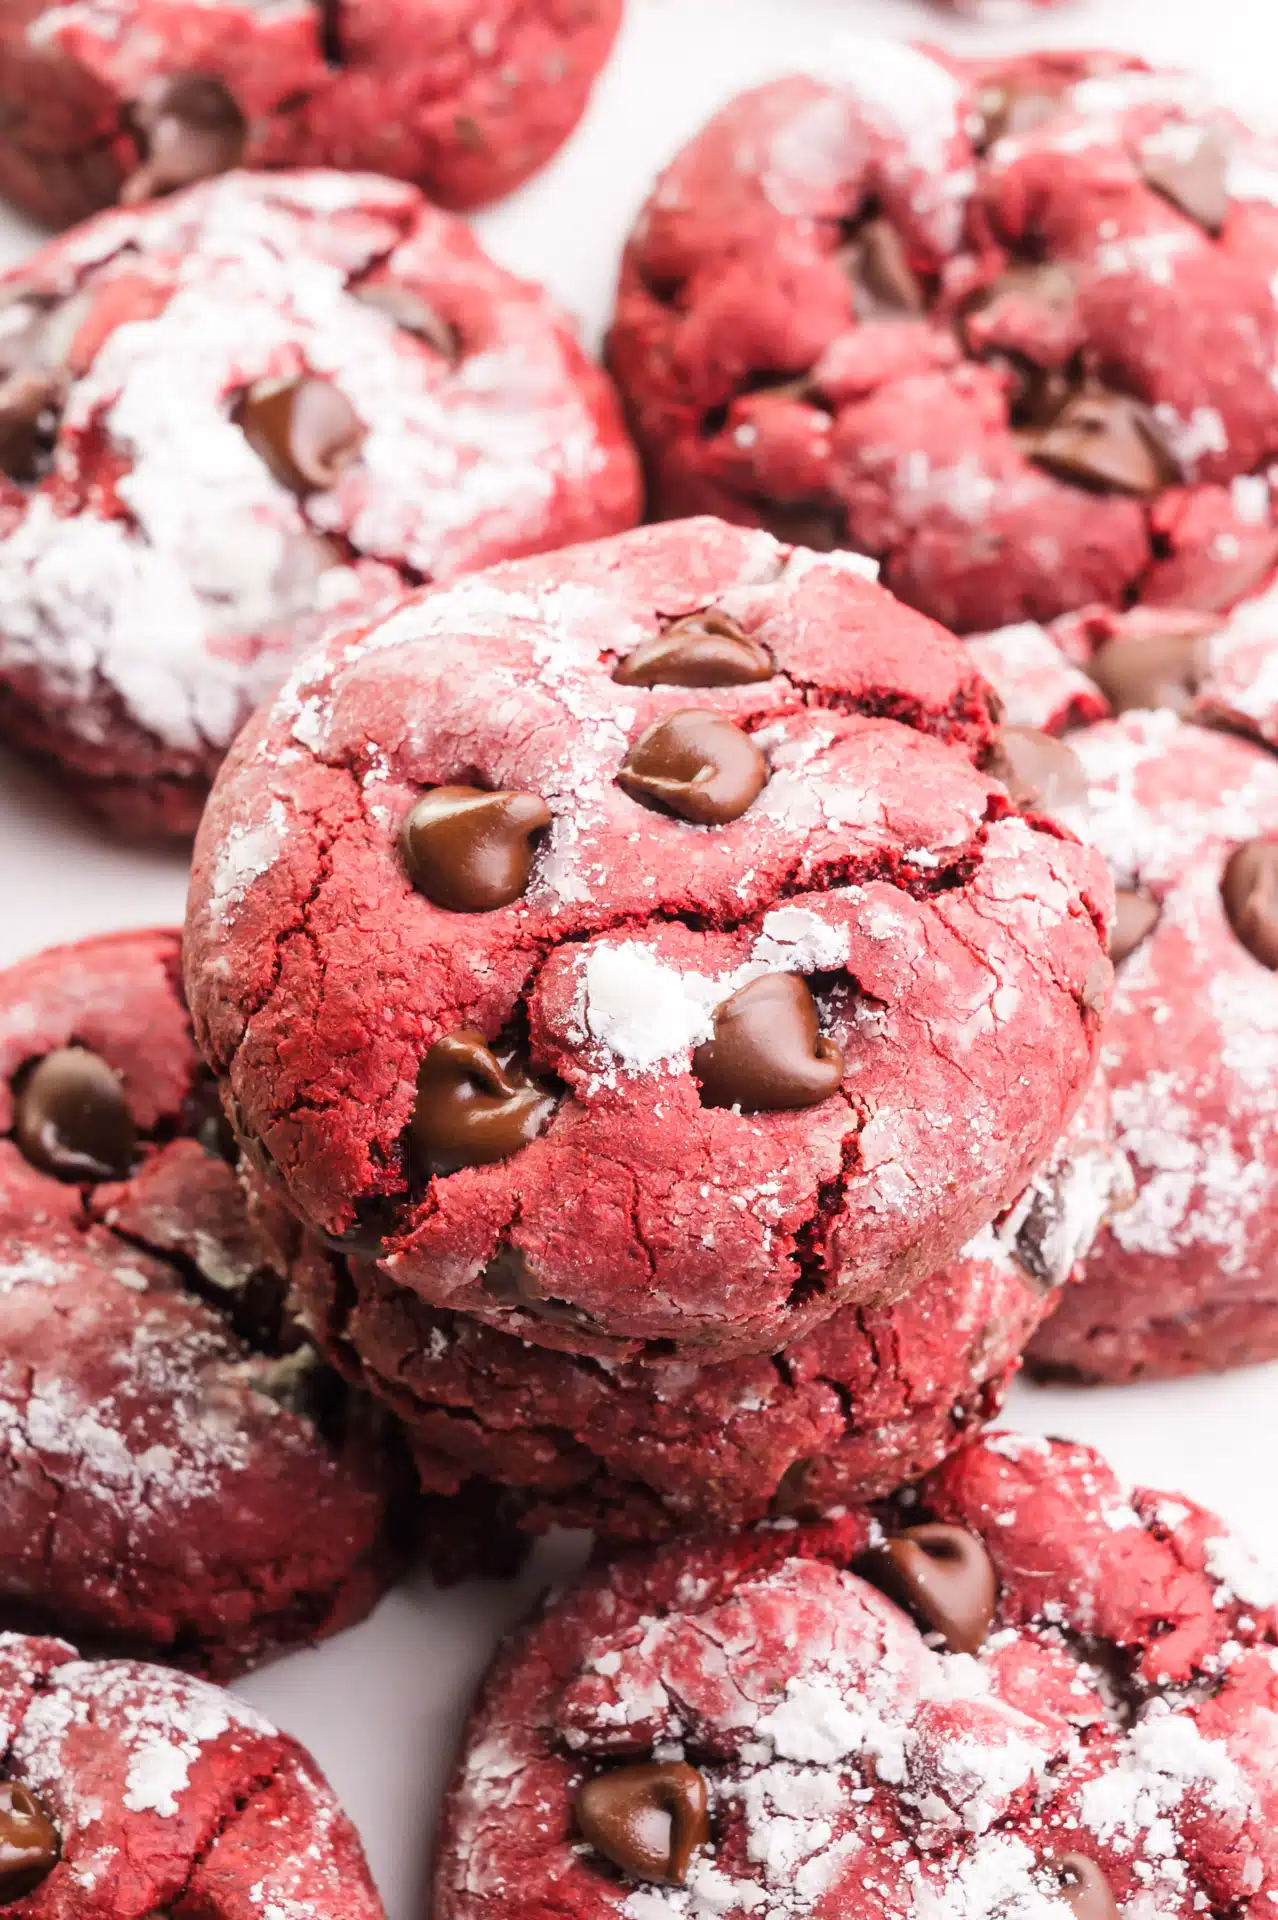 Chocolate Chip Red Velvet Cookies are stacked and surrounded by other cookies.